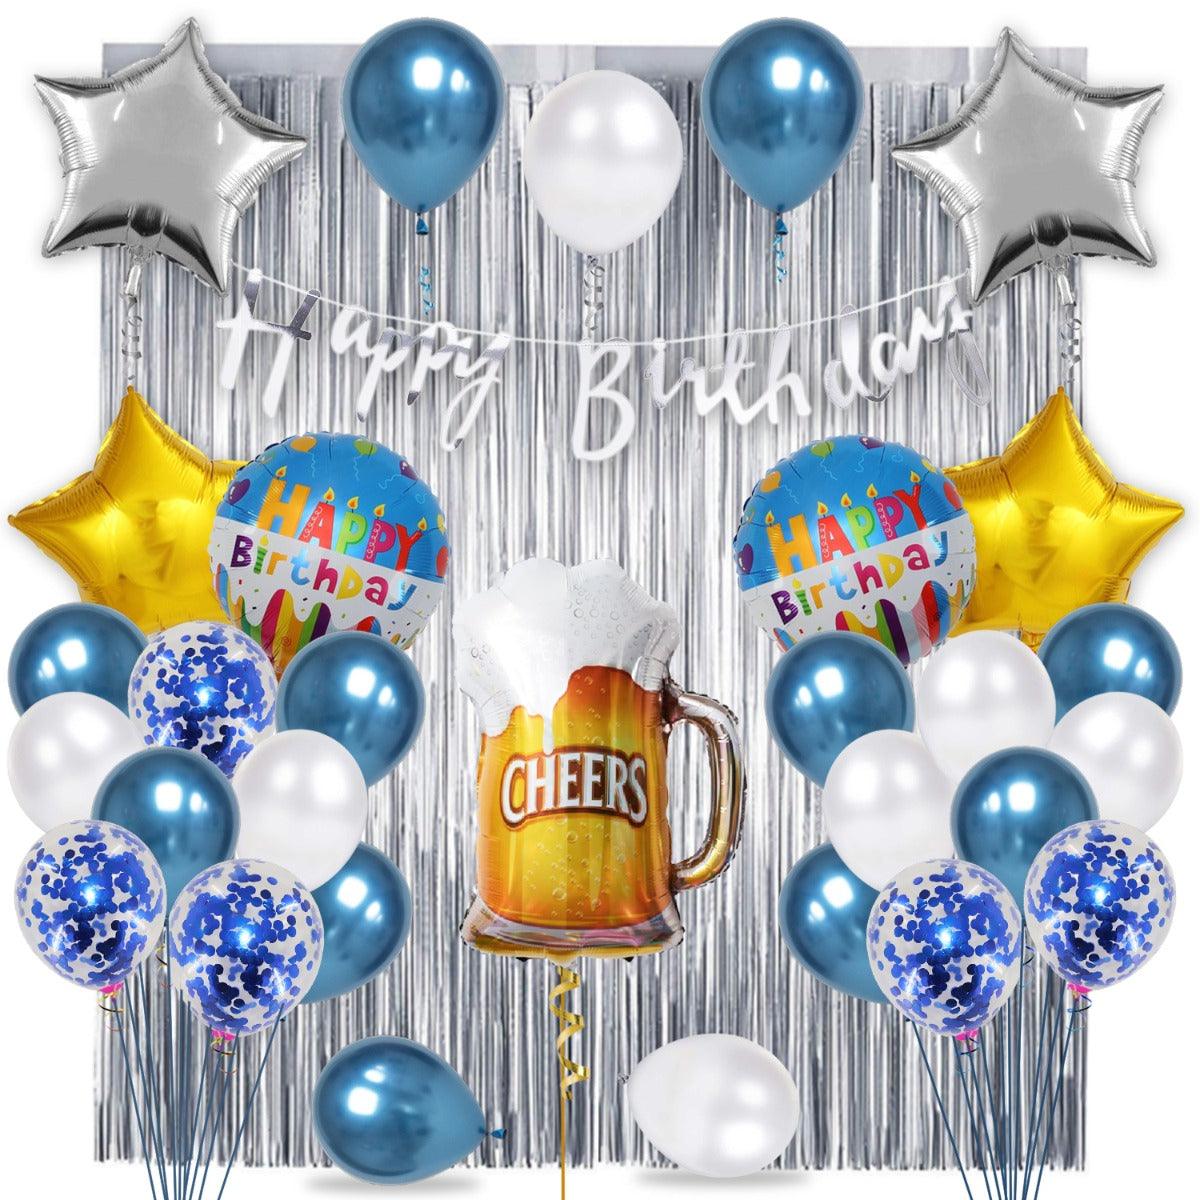 PartyCorp Happy Birthday Decoration Kit Combo 33 Pcs - Blue & White Chrome & Confetti Balloons, Silver Happy Birthday Banner, Silver Curtain, Silver Star Foil, Cheers Beer Mug Foil Balloons